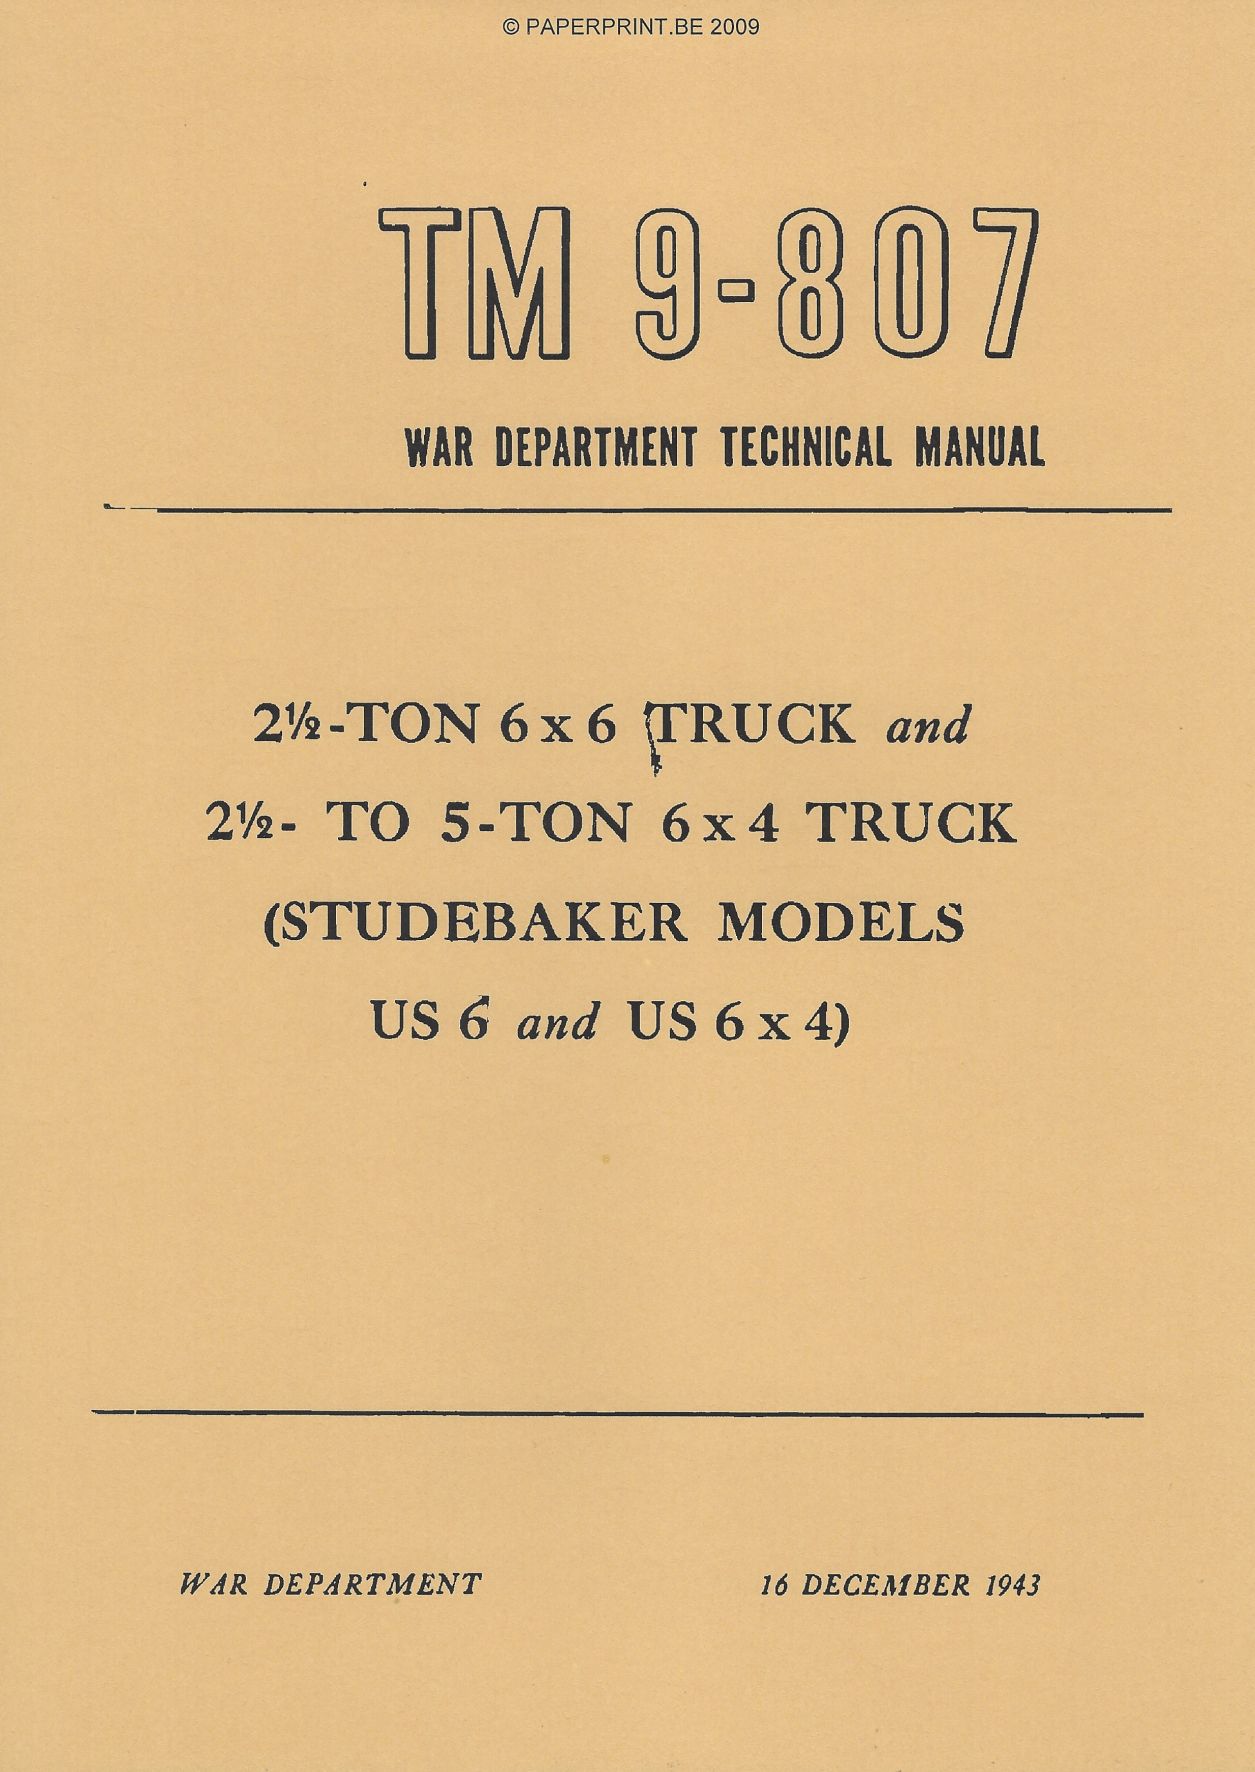 TM 9-807 US 2 ½ - TON 6x6 TRUCK AND 2 ½ TO 5 - TON 6x4 TRUCK (STUDEBAKER MODELS US6 AND US6x4)